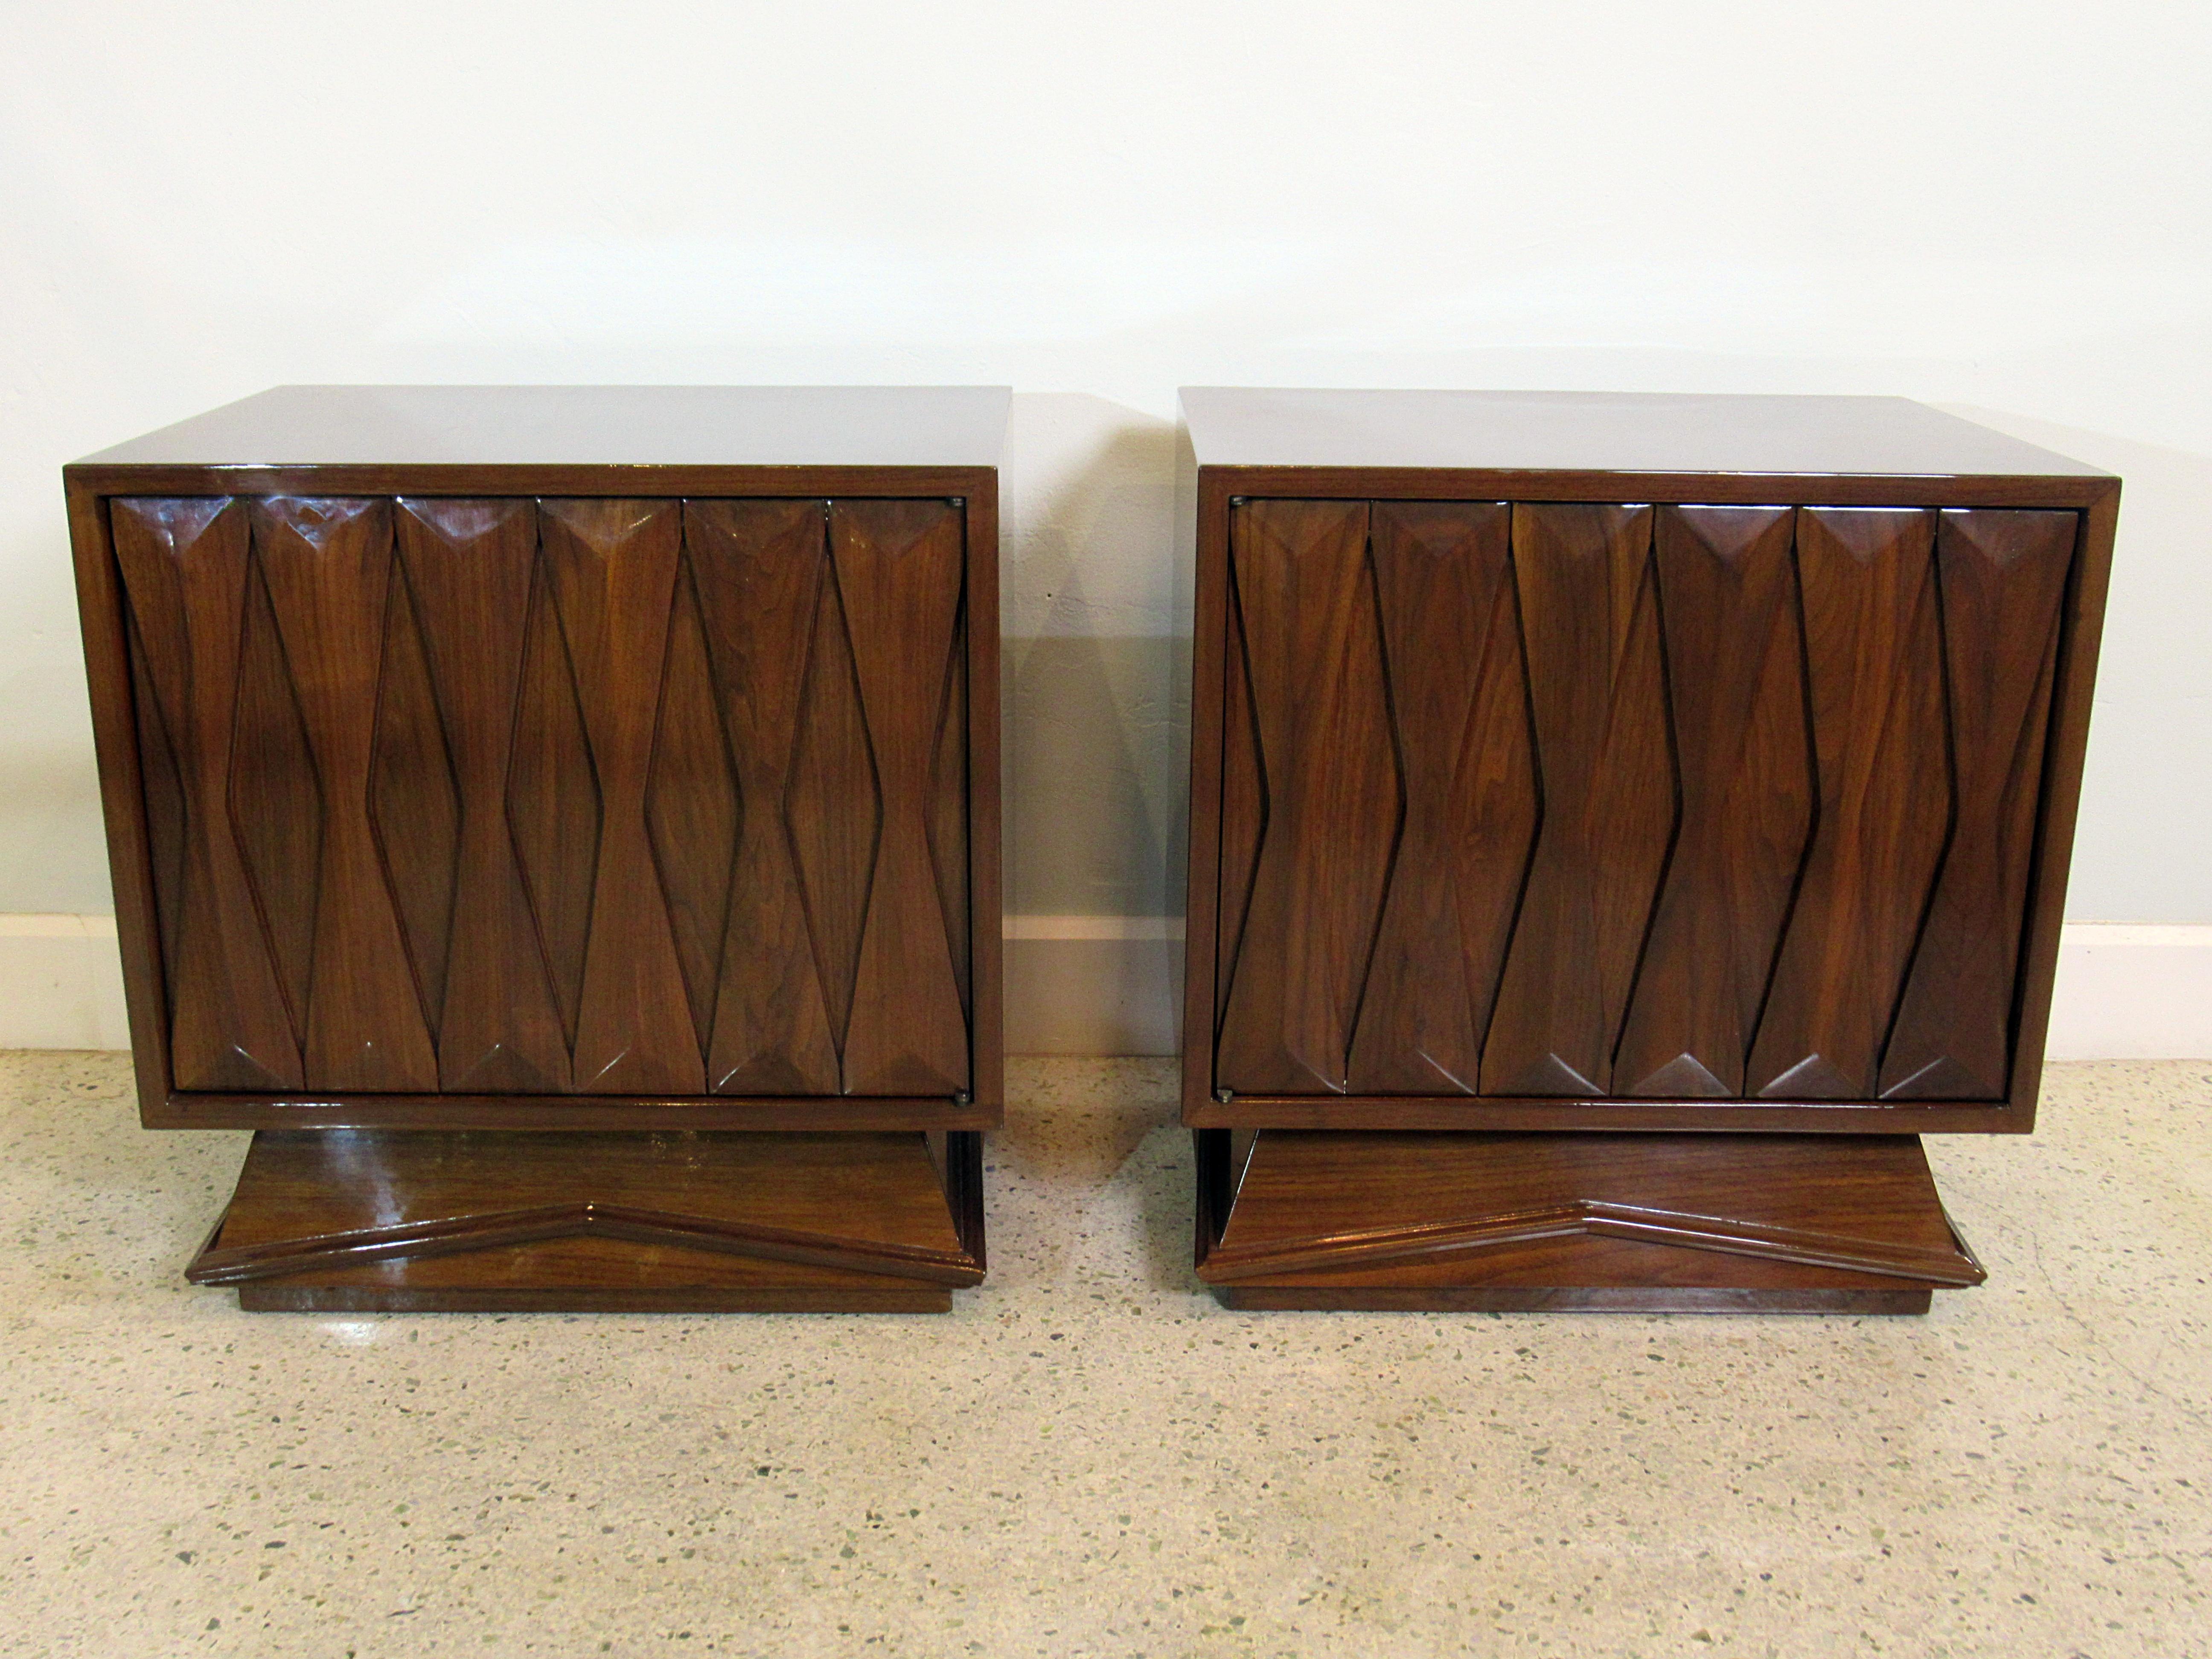 Wood Pair of Italian Modern Walnut Bedside Tables, Style of Gio Ponti, 1950s